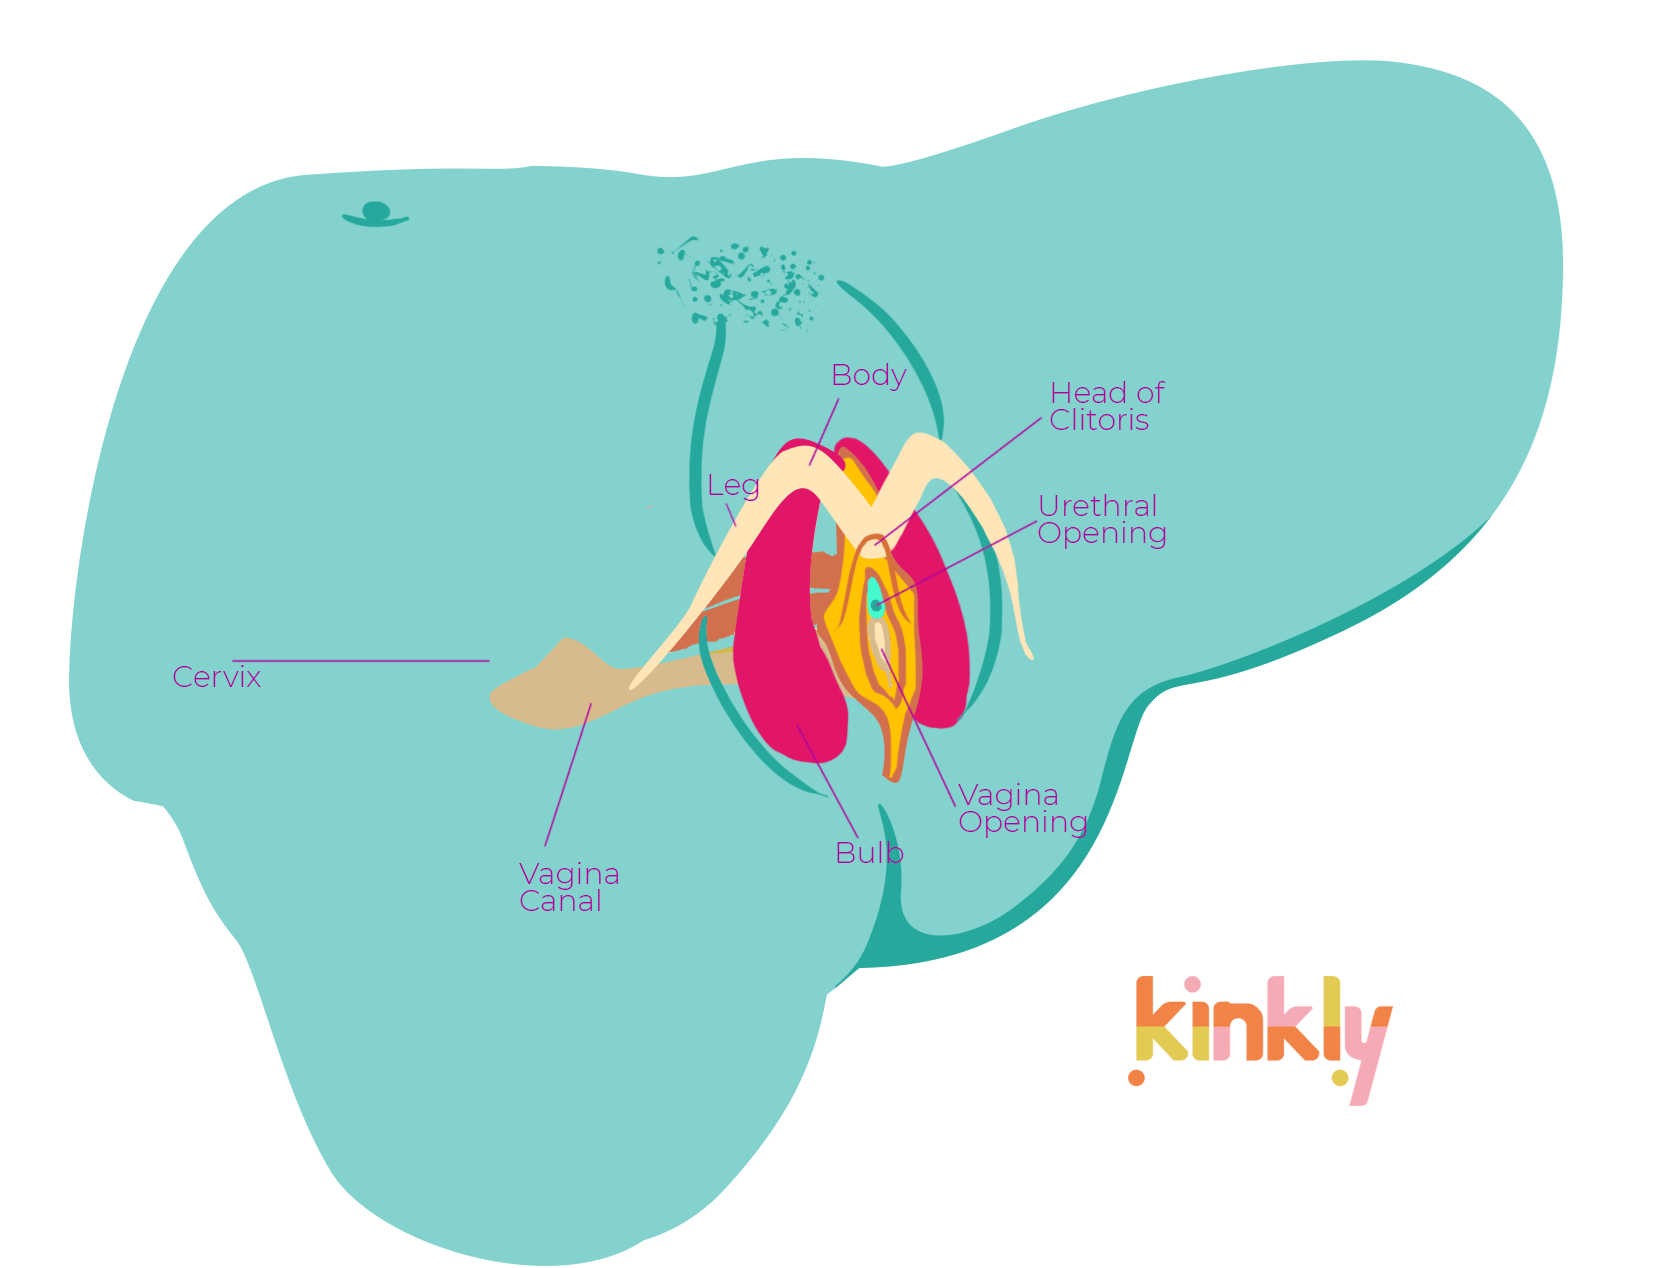 Image of the female anatomy from the outside, including the clitoris, vaginal opening, urethral opening, 